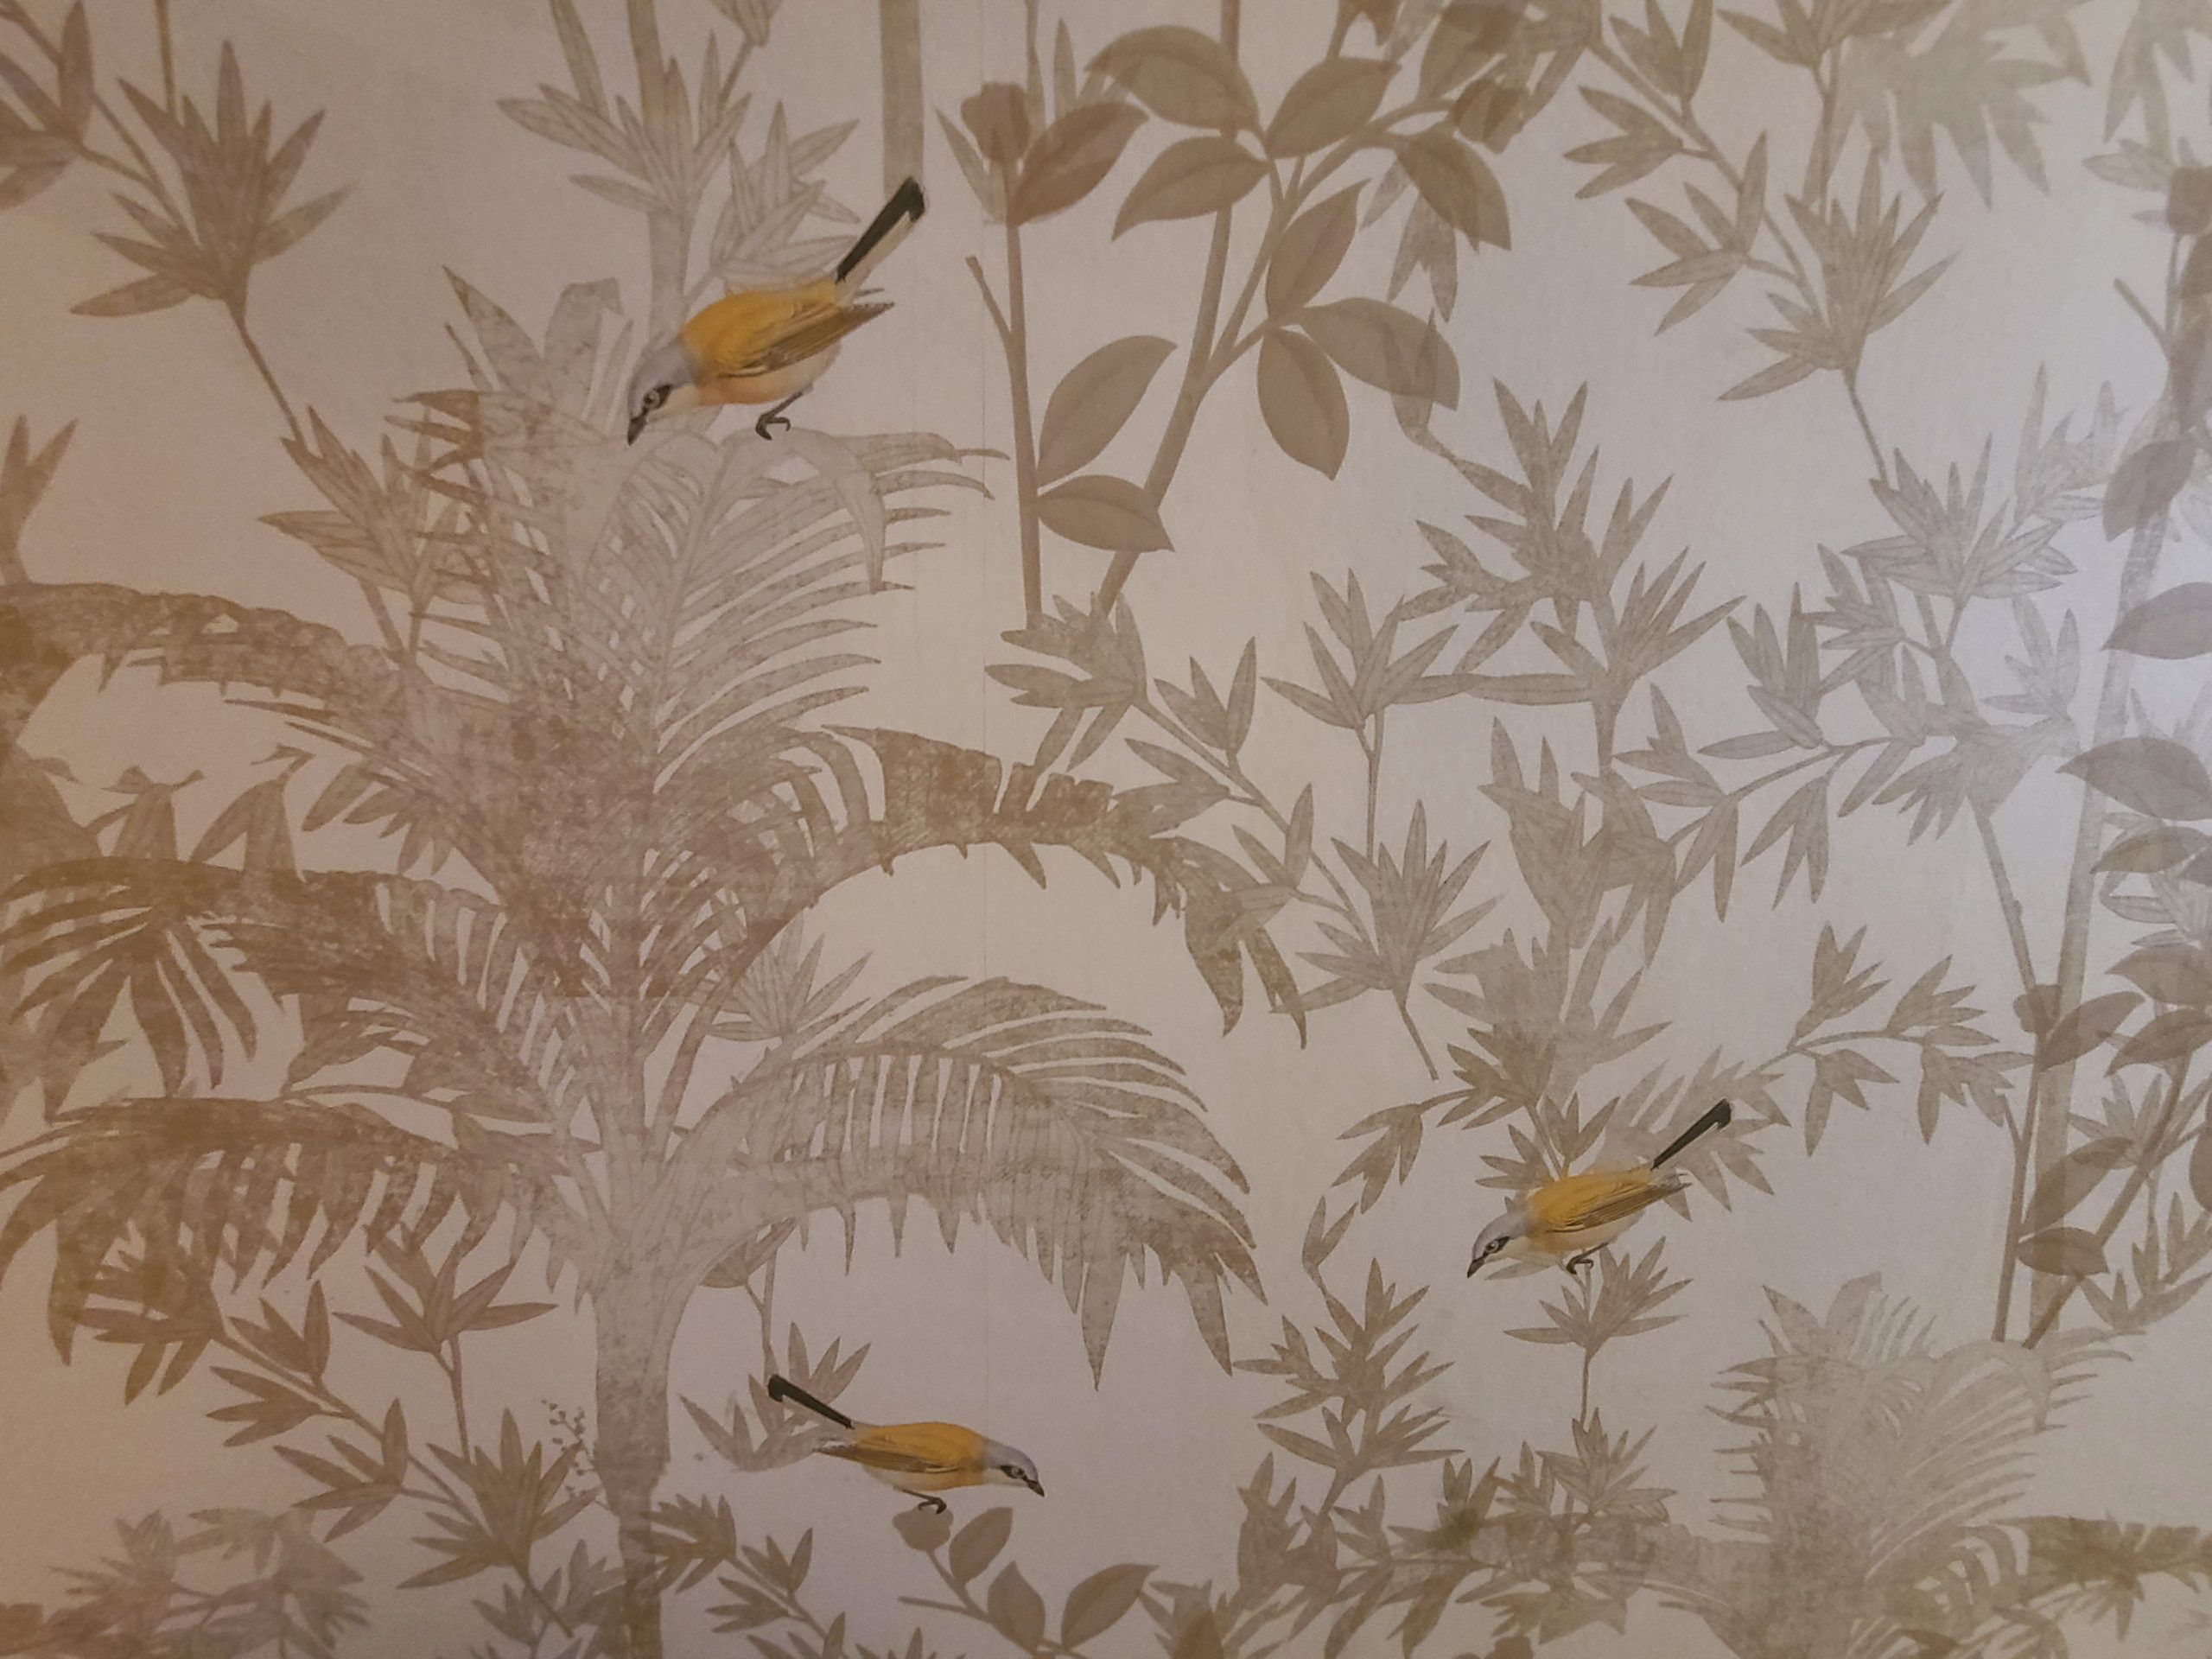 A whimsical wallpaper with a bird motif